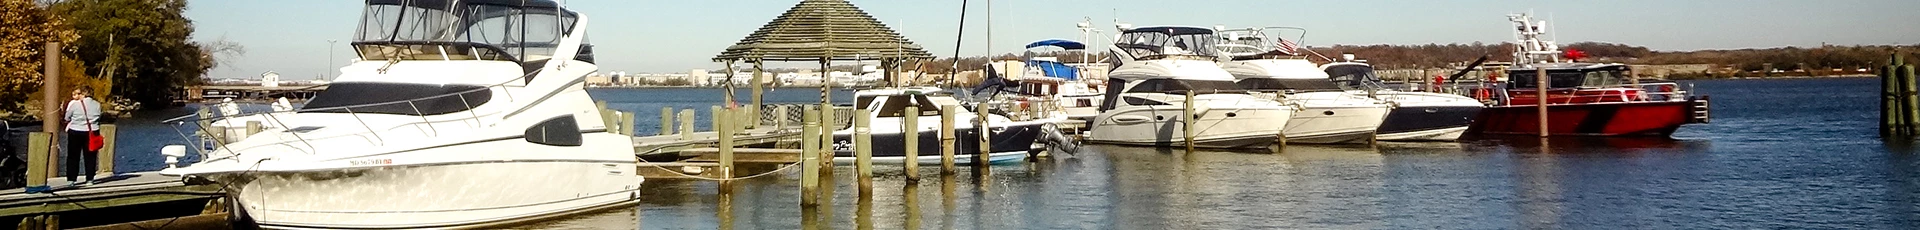 Boat Removal, Dismantle and Disposal in Panama City Florida